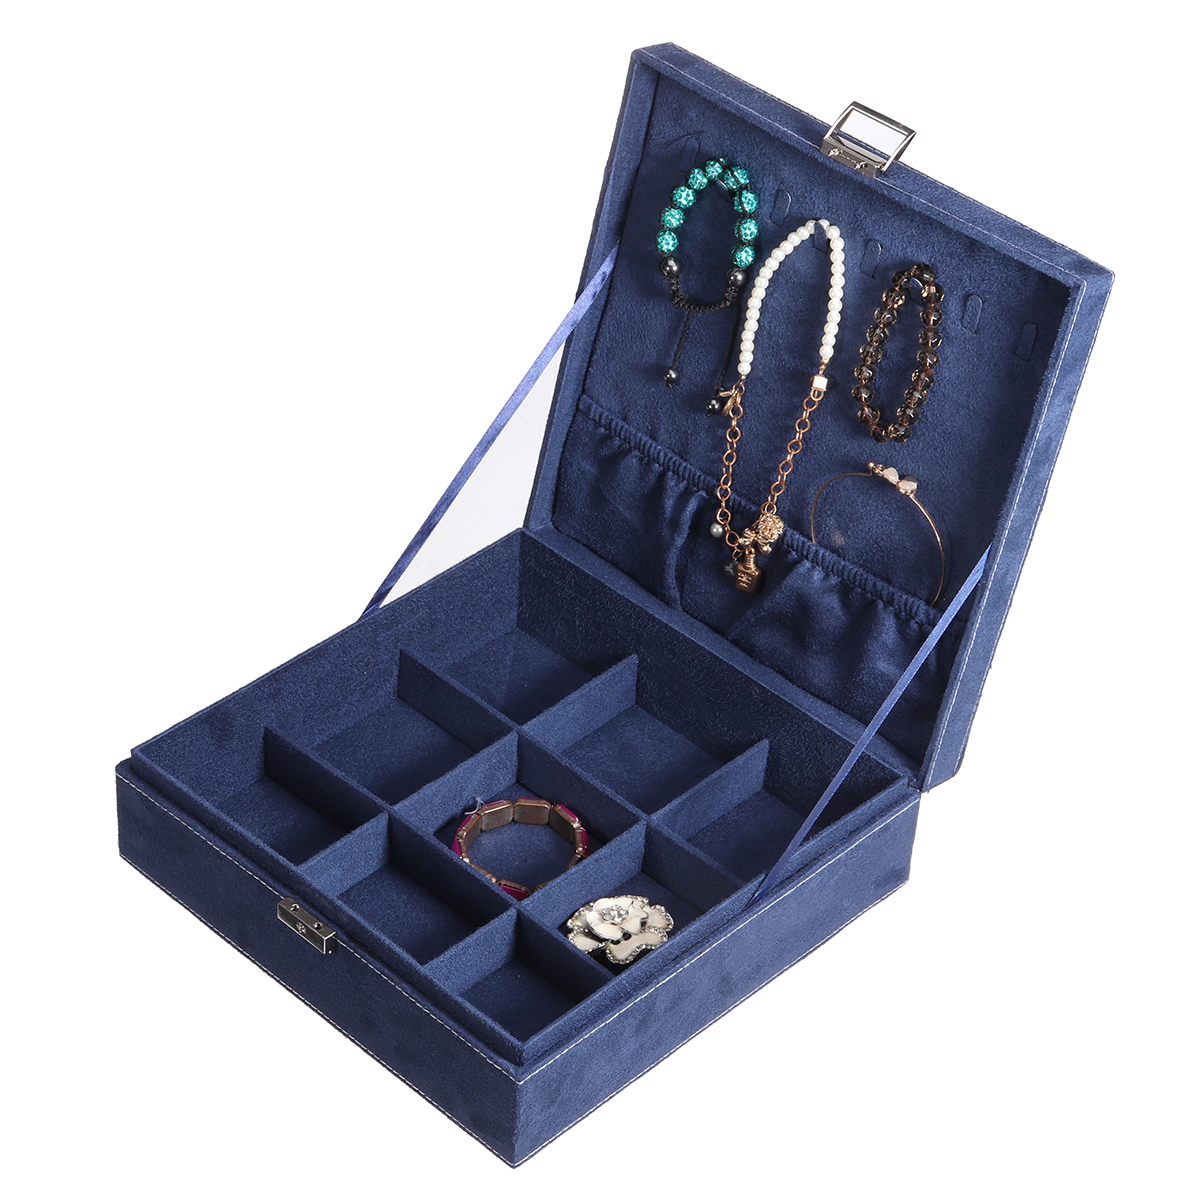 Multi-function-Vintage-Jewelry-Box-Organizers-Two-layer-Lockable-Jewelry-Display-Storage-Case-1855370-31